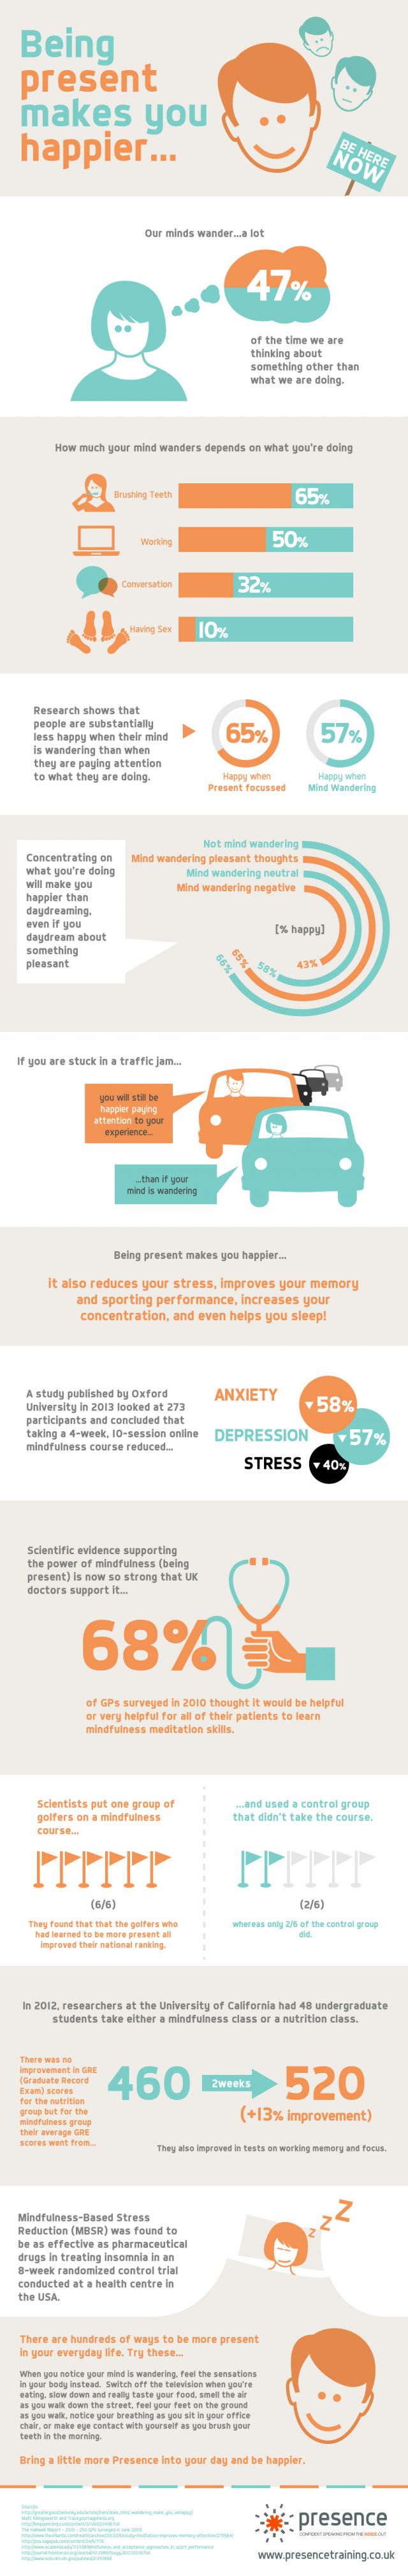 Being Present: What Does It Mean And How Can It Improve Your Health? Infographic